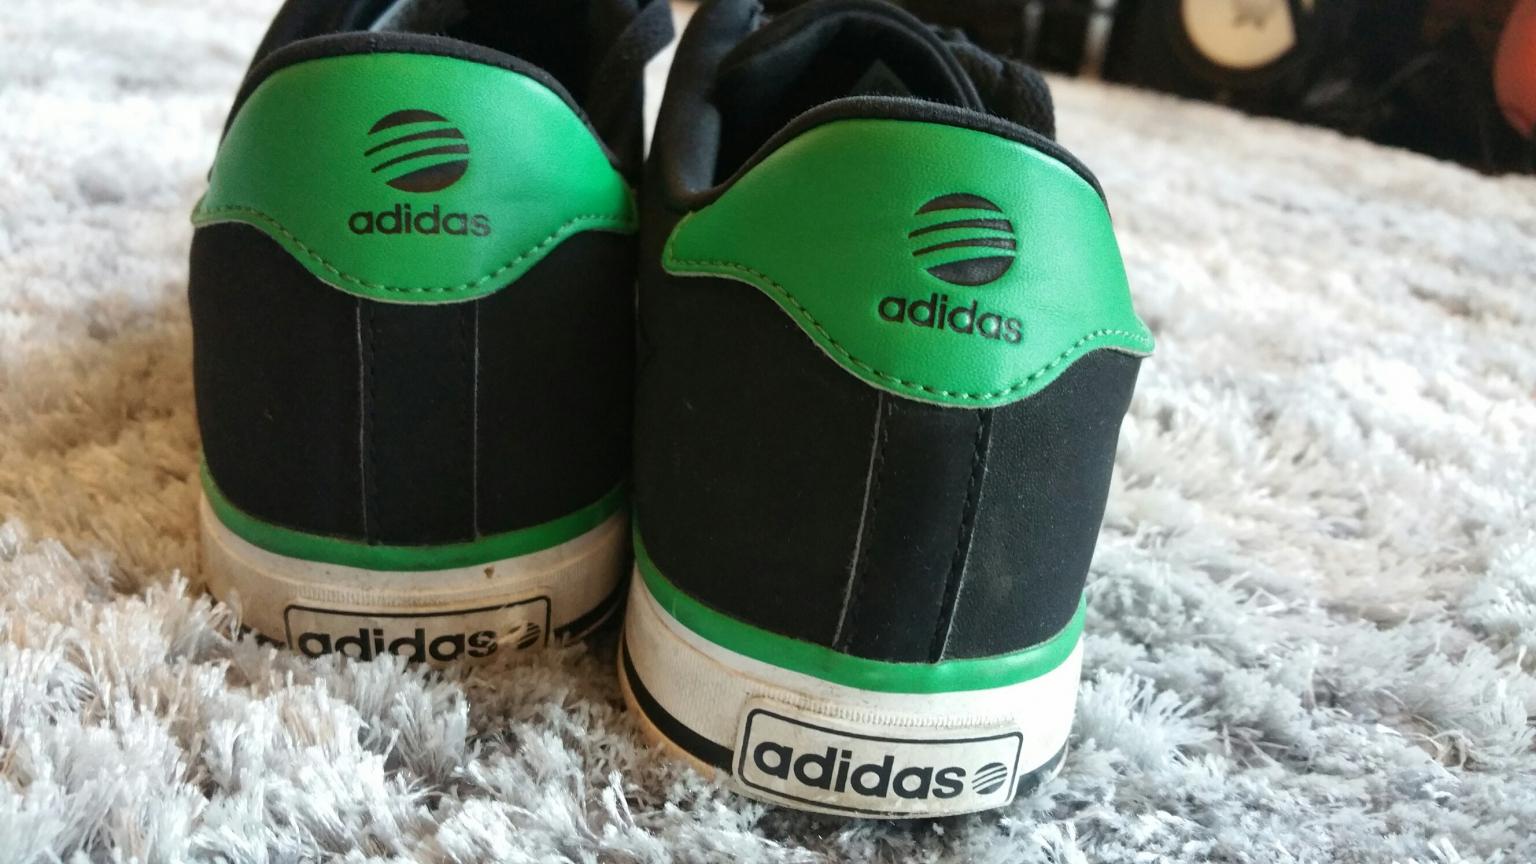 Mens Black and Green Adidas Neo size 7 